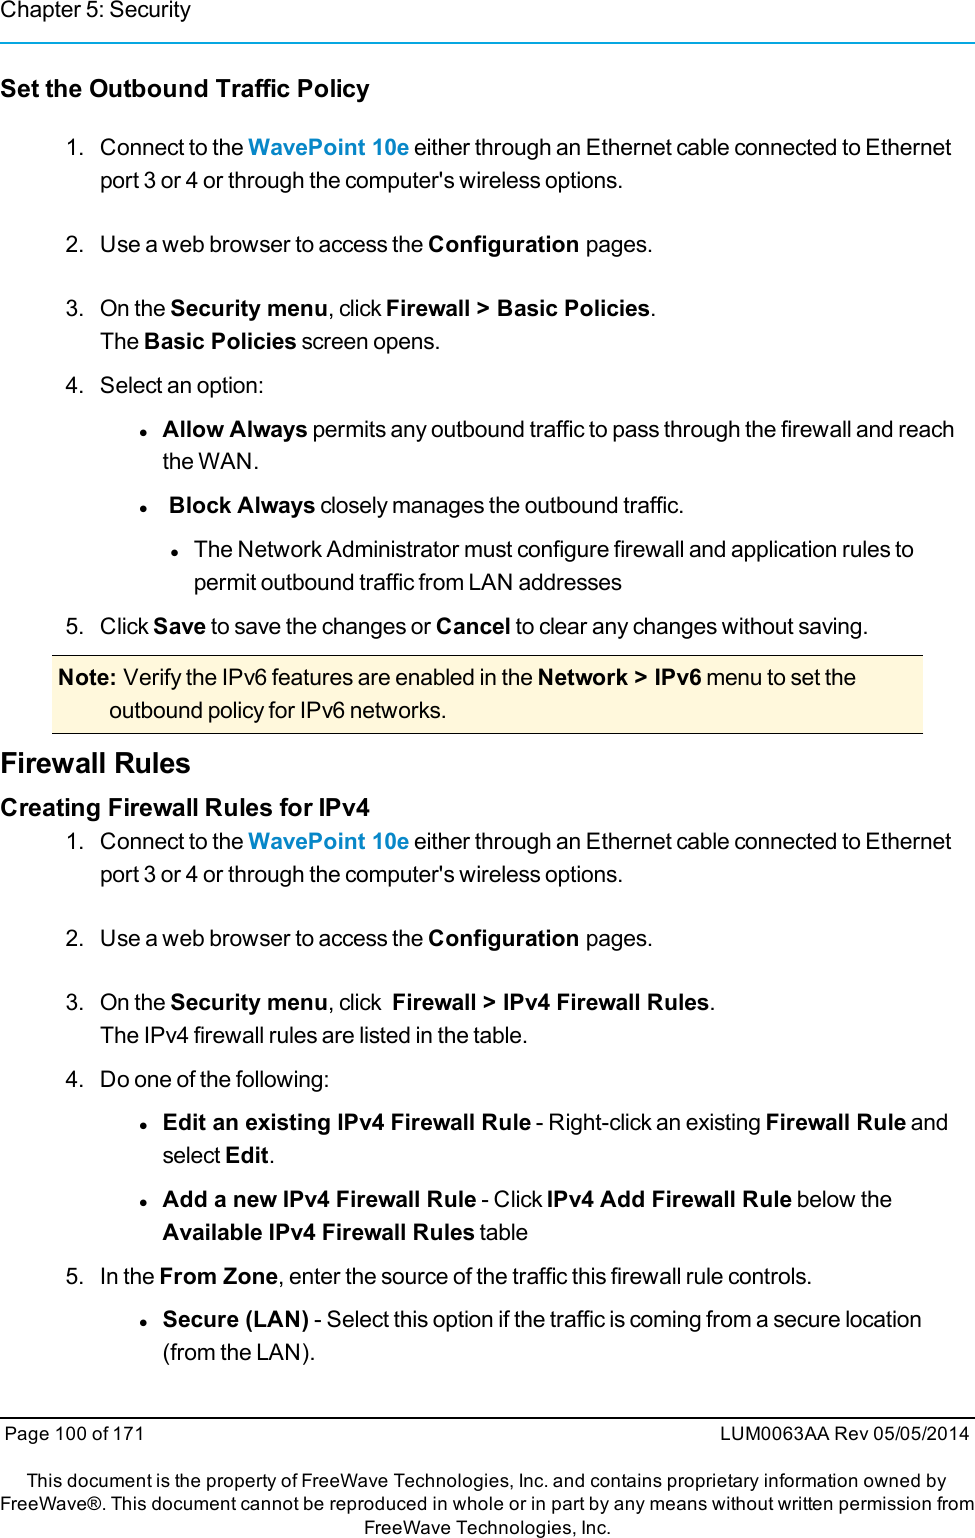 Chapter 5: SecuritySet the Outbound Traffic Policy1. Connect to the WavePoint 10e either through an Ethernet cable connected to Ethernetport 3 or 4 or through the computer&apos;s wireless options.2. Use a web browser to access the Configuration pages.3. On the Security menu, click Firewall &gt; Basic Policies.The Basic Policies screen opens.4. Select an option:lAllow Always permits any outbound traffic to pass through the firewall and reachthe WAN.lBlock Always closely manages the outbound traffic.lThe Network Administrator must configure firewall and application rules topermit outbound traffic from LAN addresses5. Click Save to save the changes or Cancel to clear any changes without saving.Note: Verify the IPv6 features are enabled in the Network &gt; IPv6 menu to set theoutbound policy for IPv6 networks.Firewall RulesCreating Firewall Rules for IPv41. Connect to the WavePoint 10e either through an Ethernet cable connected to Ethernetport 3 or 4 or through the computer&apos;s wireless options.2. Use a web browser to access the Configuration pages.3. On the Security menu, click Firewall &gt; IPv4 Firewall Rules.The IPv4 firewall rules are listed in the table.4. Do one of the following:lEdit an existing IPv4 Firewall Rule - Right-click an existing Firewall Rule andselect Edit.lAdd a new IPv4 Firewall Rule - Click IPv4 Add Firewall Rule below theAvailable IPv4 Firewall Rules table5. In the From Zone, enter the source of the traffic this firewall rule controls.lSecure (LAN) - Select this option if the traffic is coming from a secure location(from the LAN).Page 100 of 171 LUM0063AA Rev 05/05/2014This document is the property of FreeWave Technologies, Inc. and contains proprietary information owned byFreeWave®. This document cannot be reproduced in whole or in part by any means without written permission fromFreeWave Technologies, Inc.